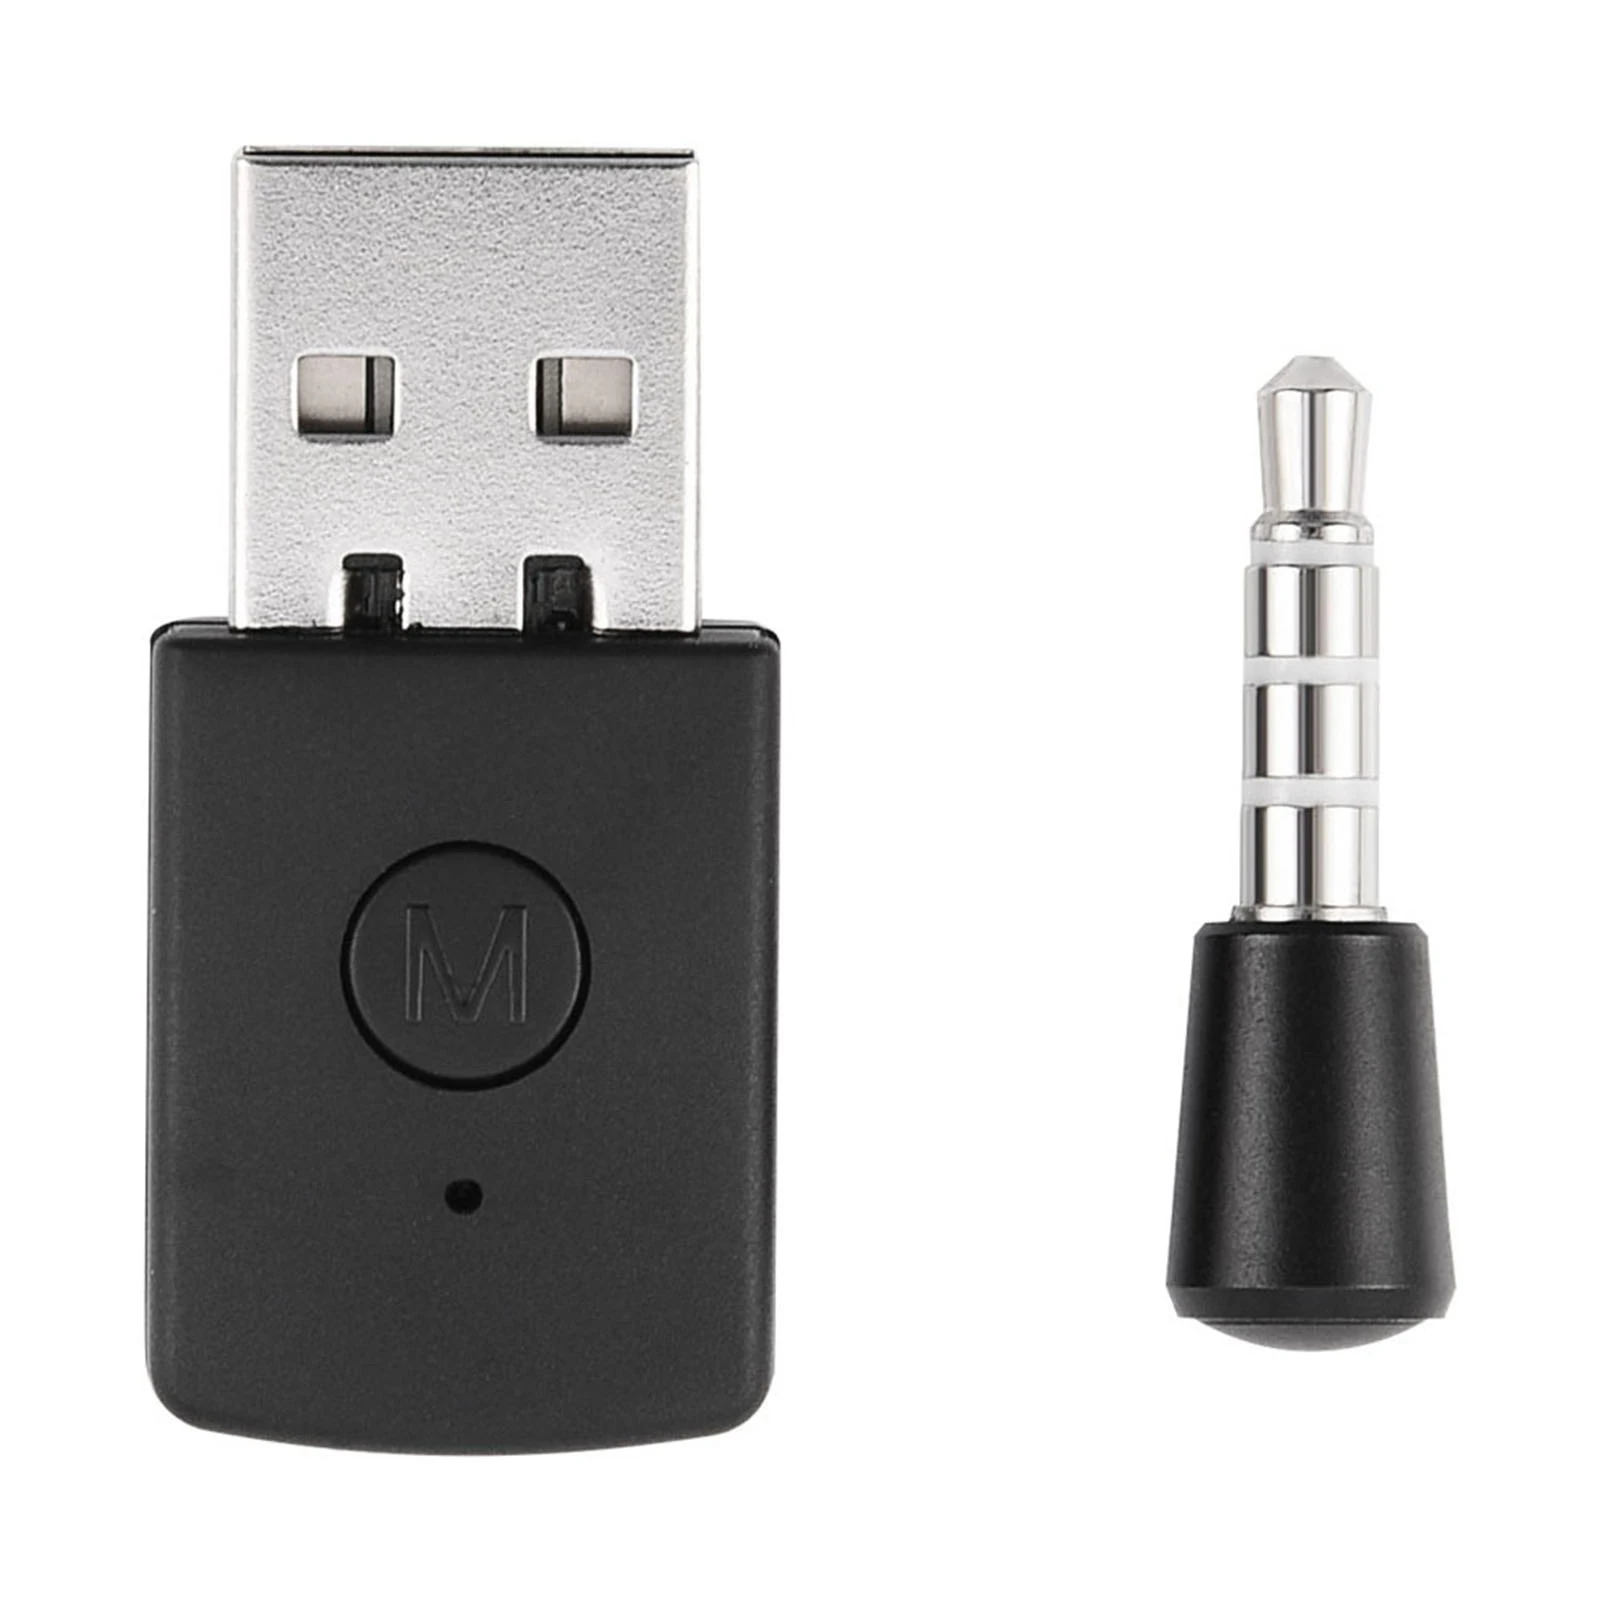 

Mini USB 2.0 for Bluetooth 5.1 Adapter/Dongle Receiver and Transmitters for PS4 PlayStation